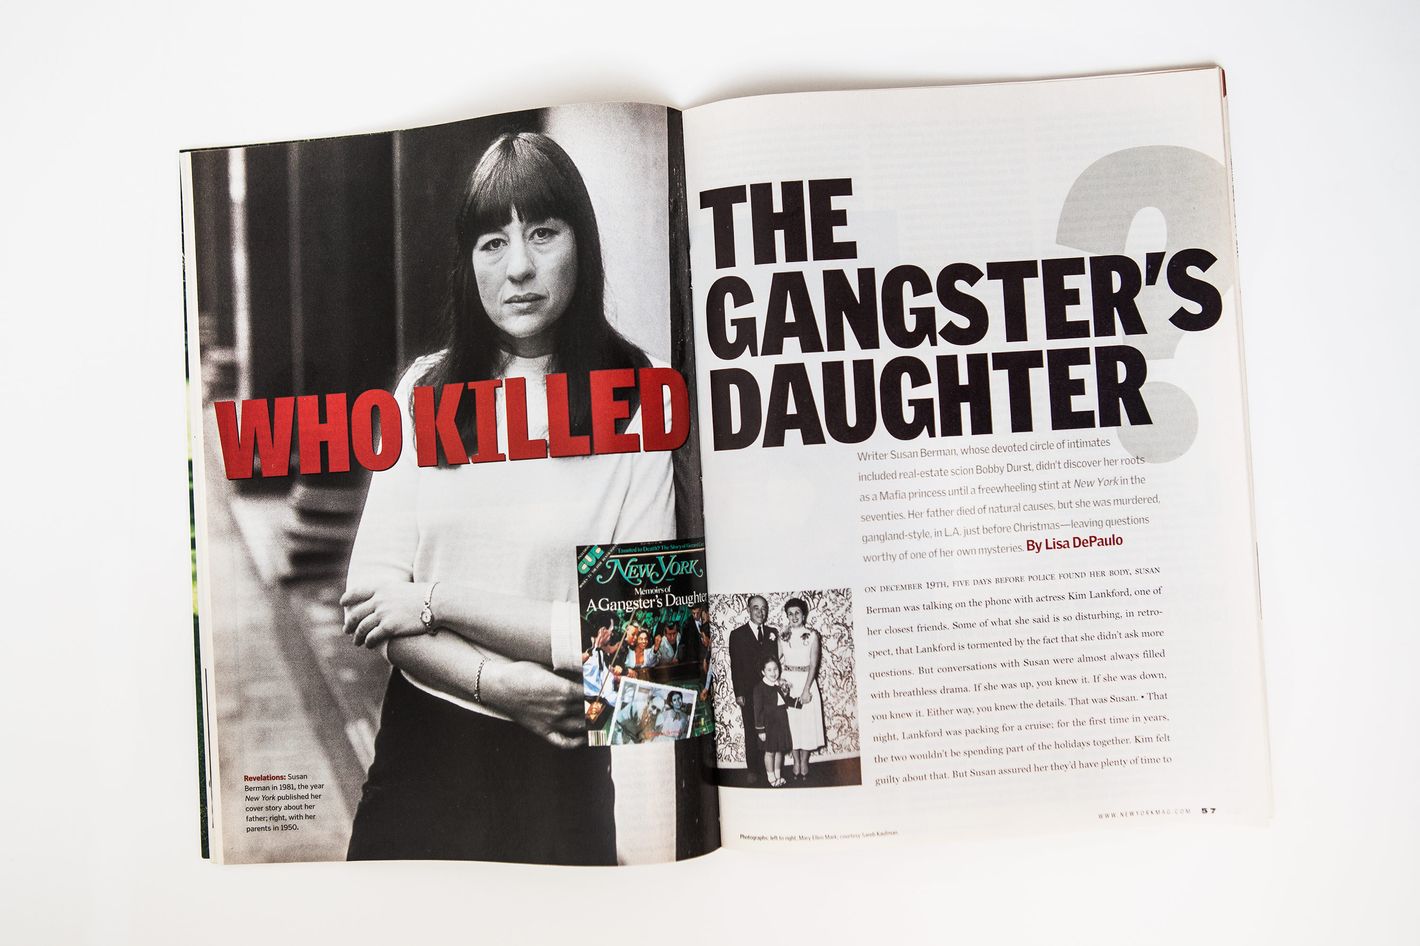 Who Killed the Gangsters Daughter? photo photo